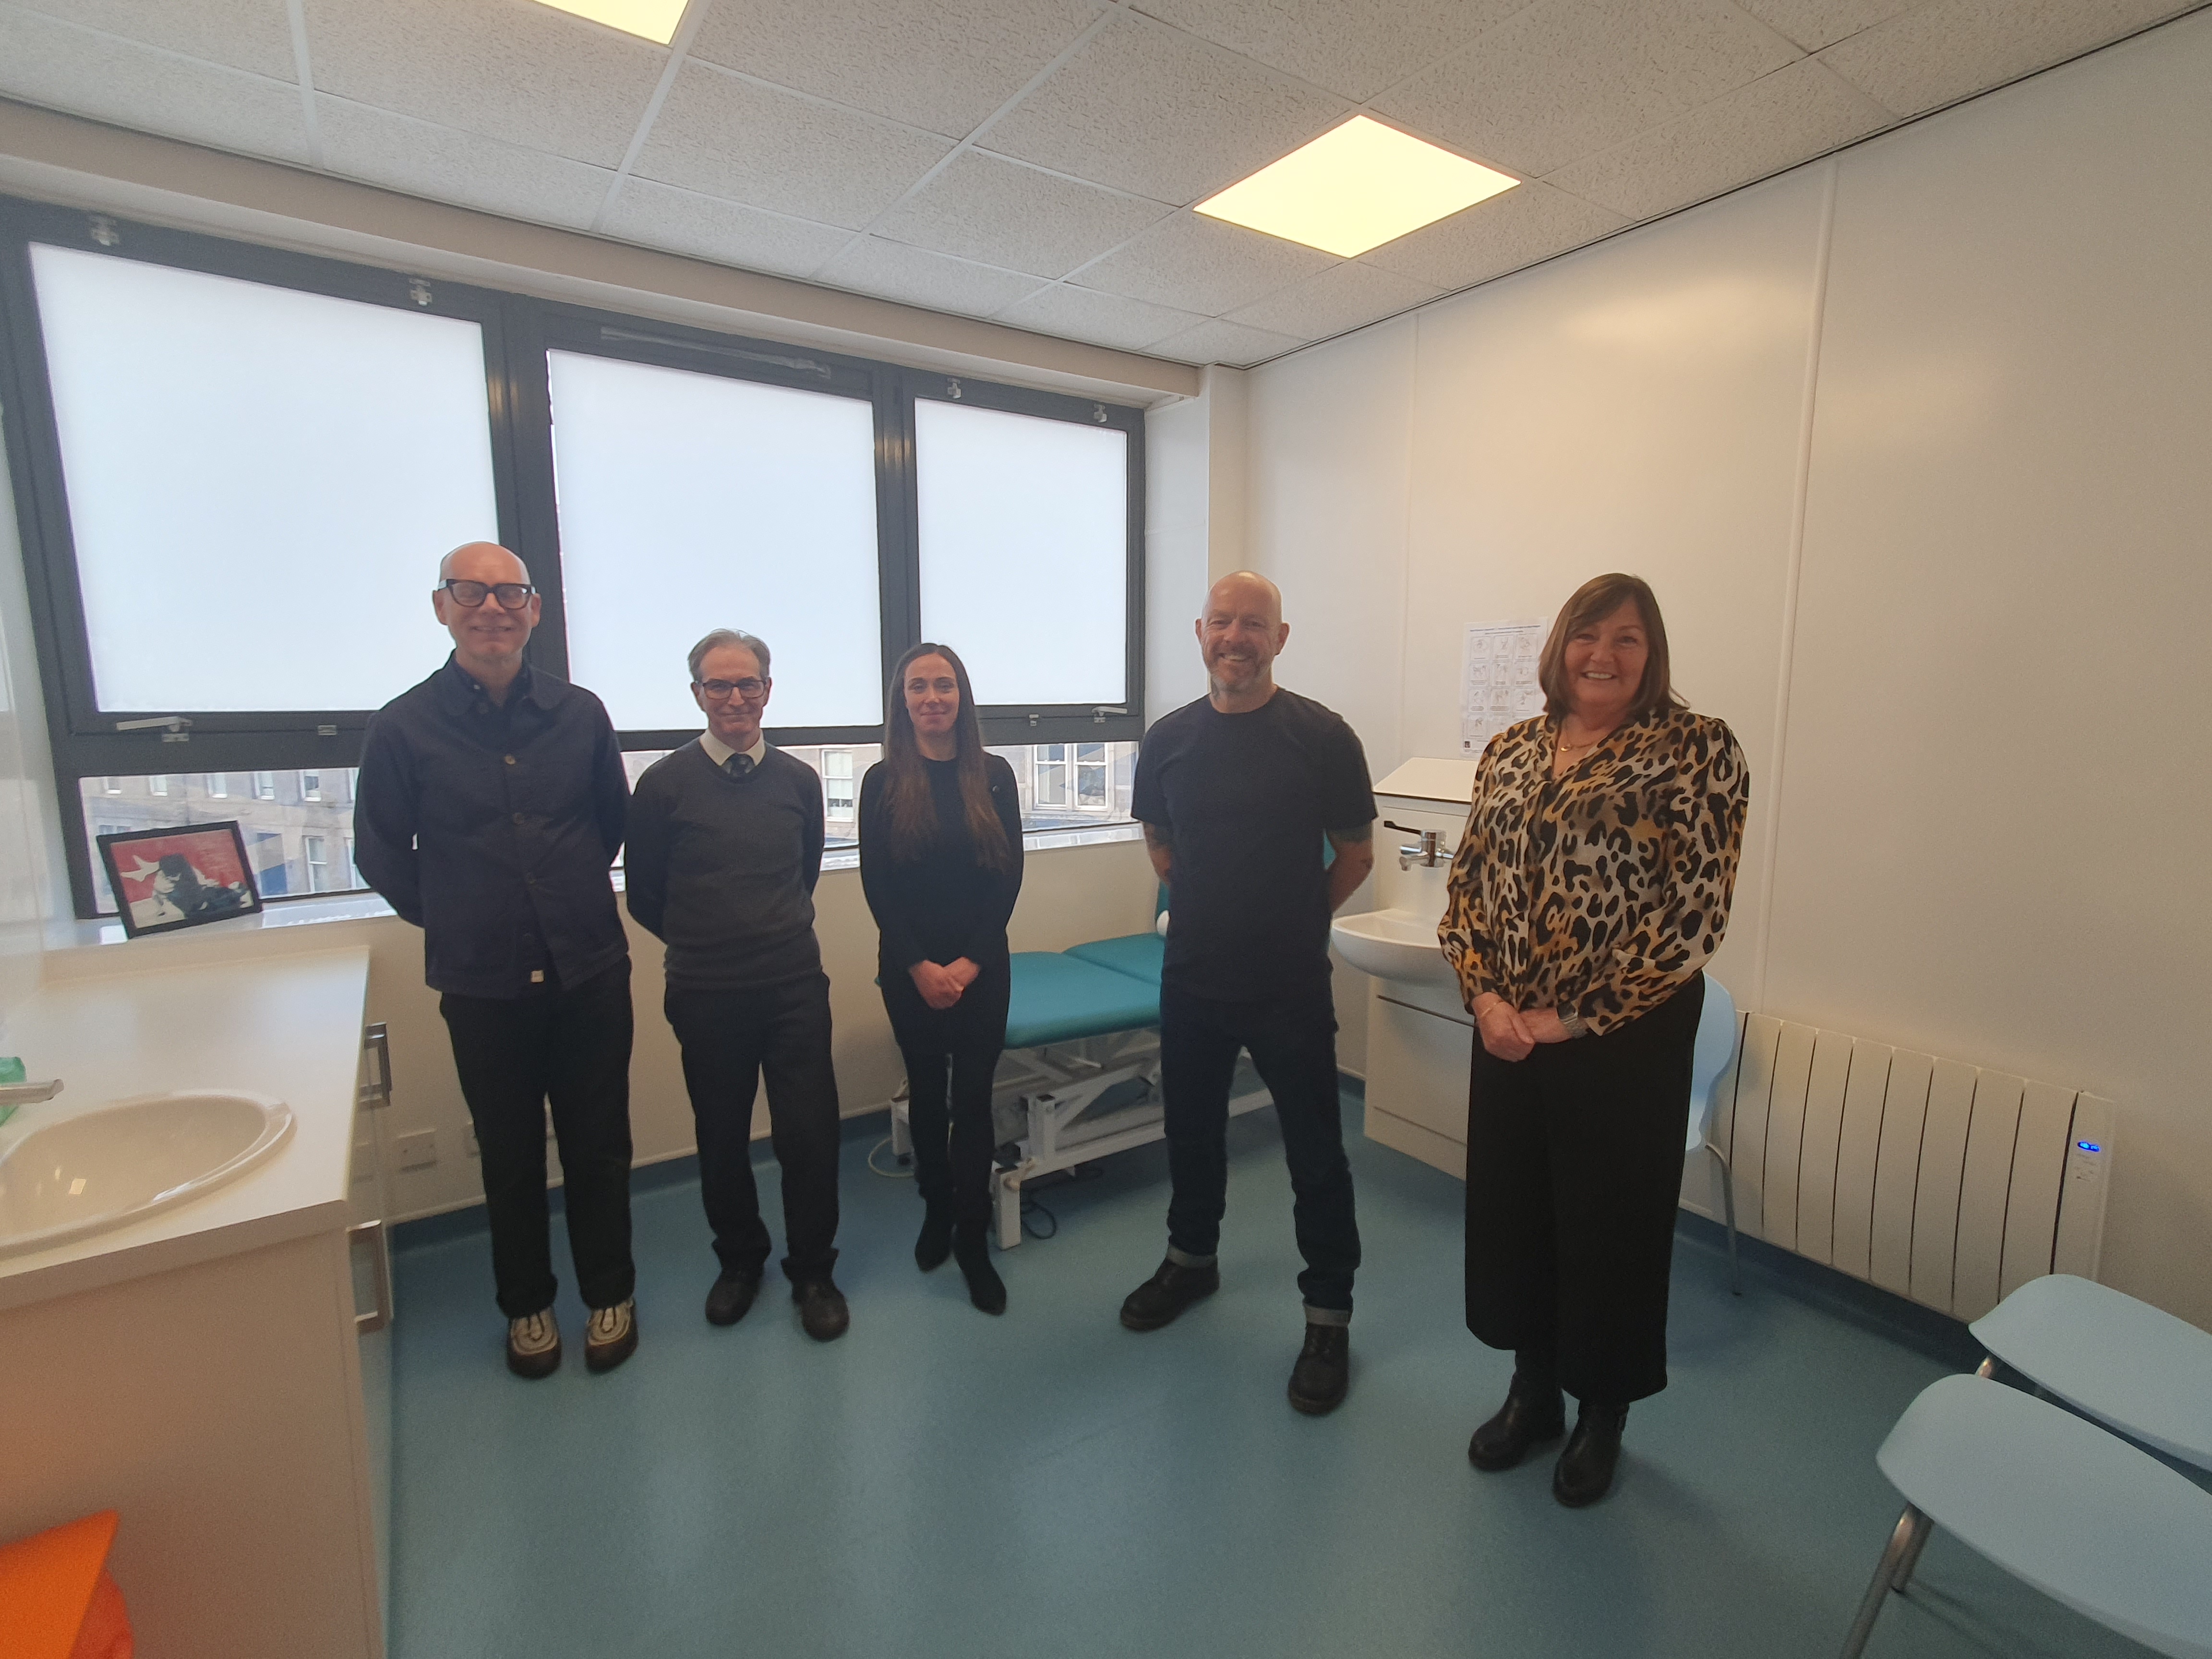 Turning Point Scotland launches new clinical room at Aberdeen Housing Services